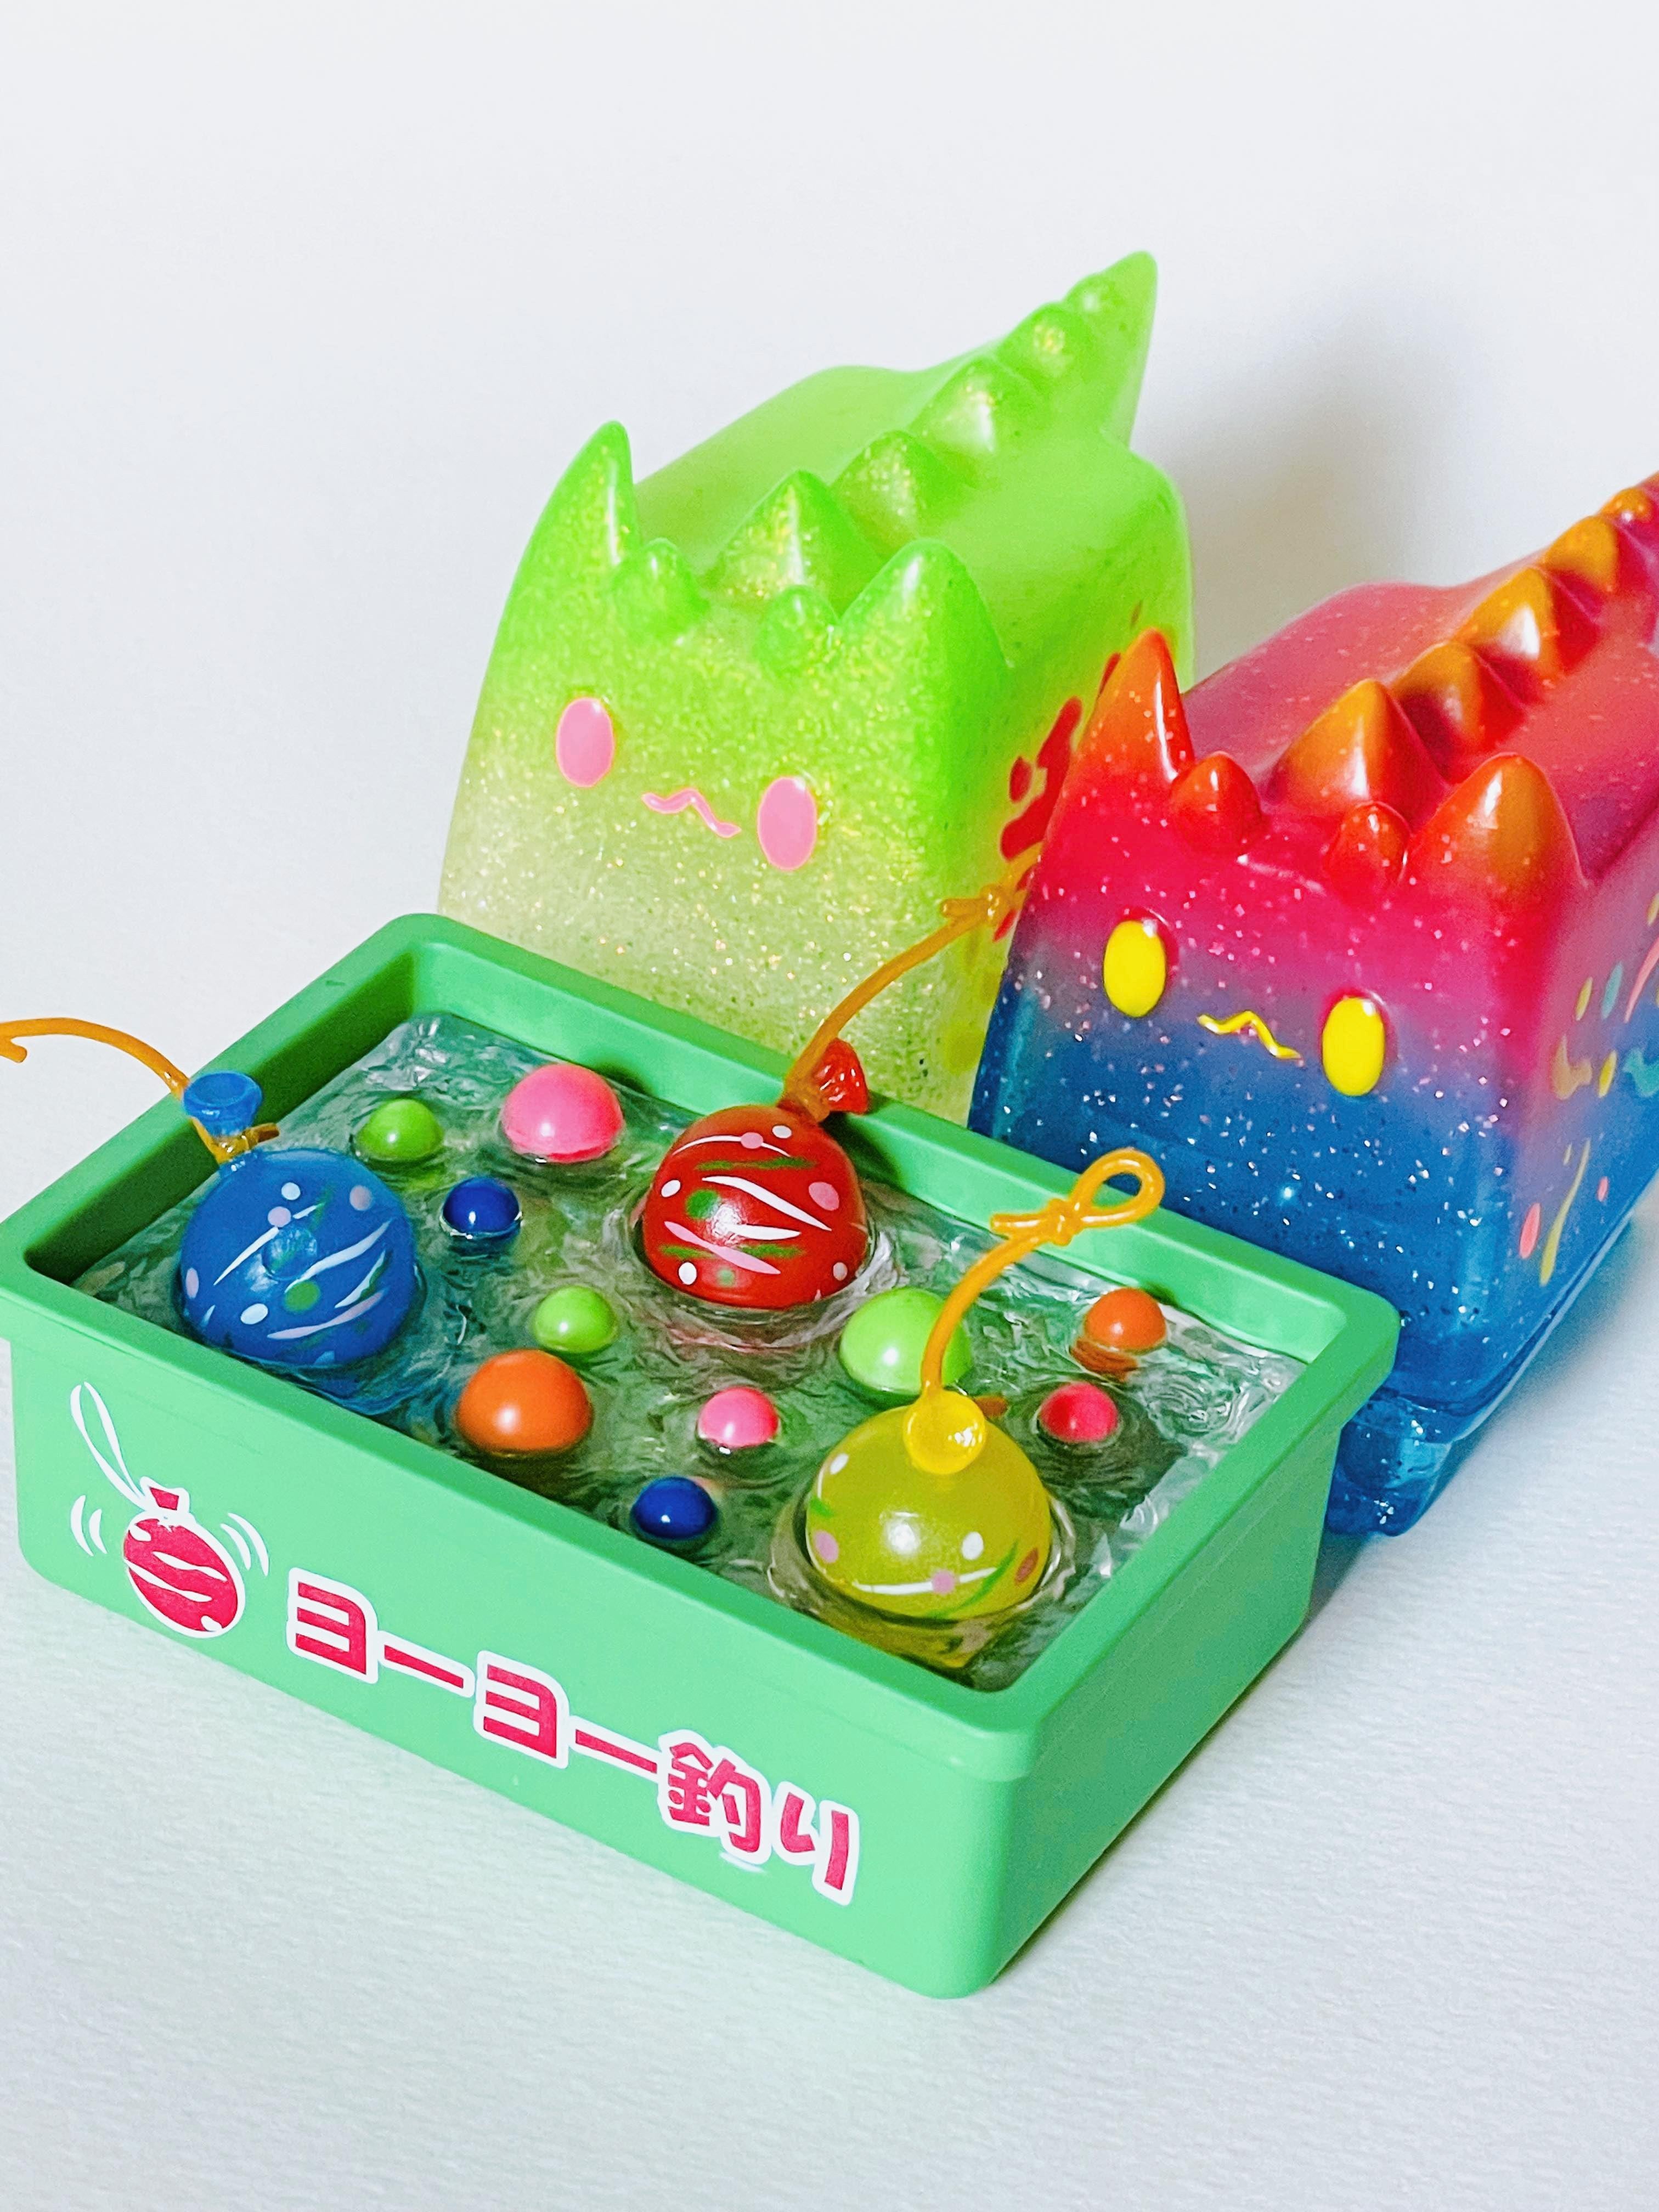 Box Cat - kakigori and fireworks by Rato Kim, plastic baby toys in a container, indoor toy.